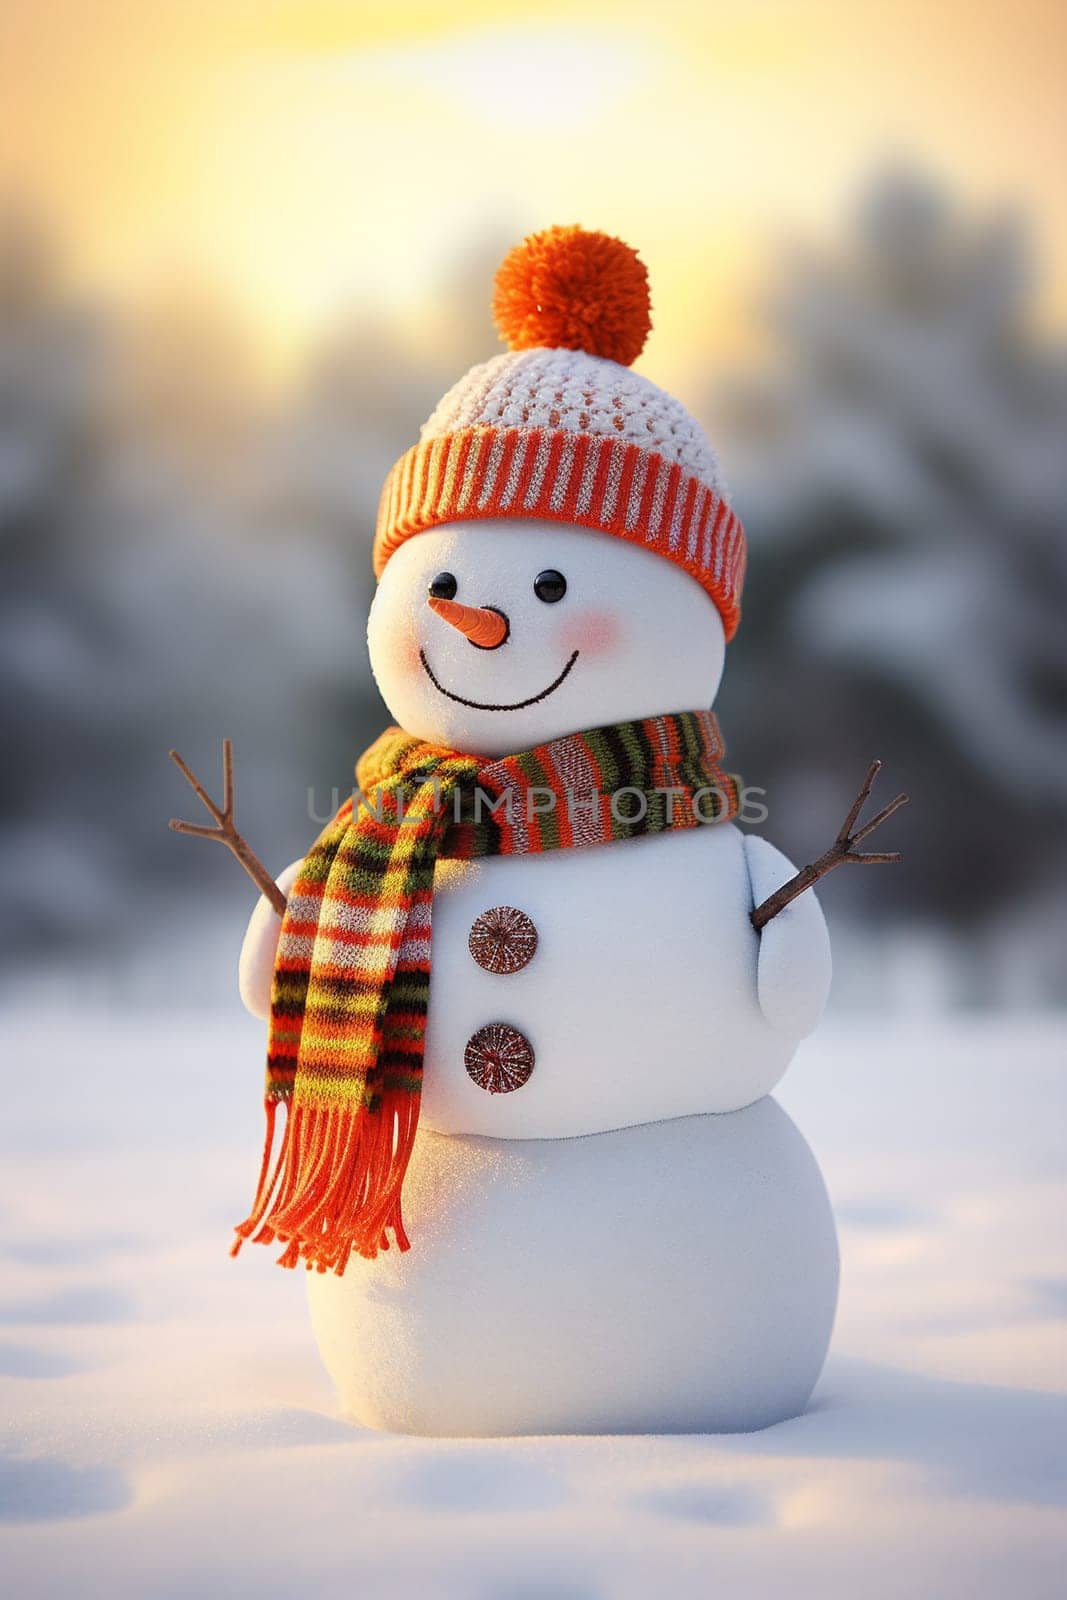 A festive snowman, adorned with a cozy hat and scarf, spreading Christmas holiday cheer in the frosty outdoor wonderland by chrisroll